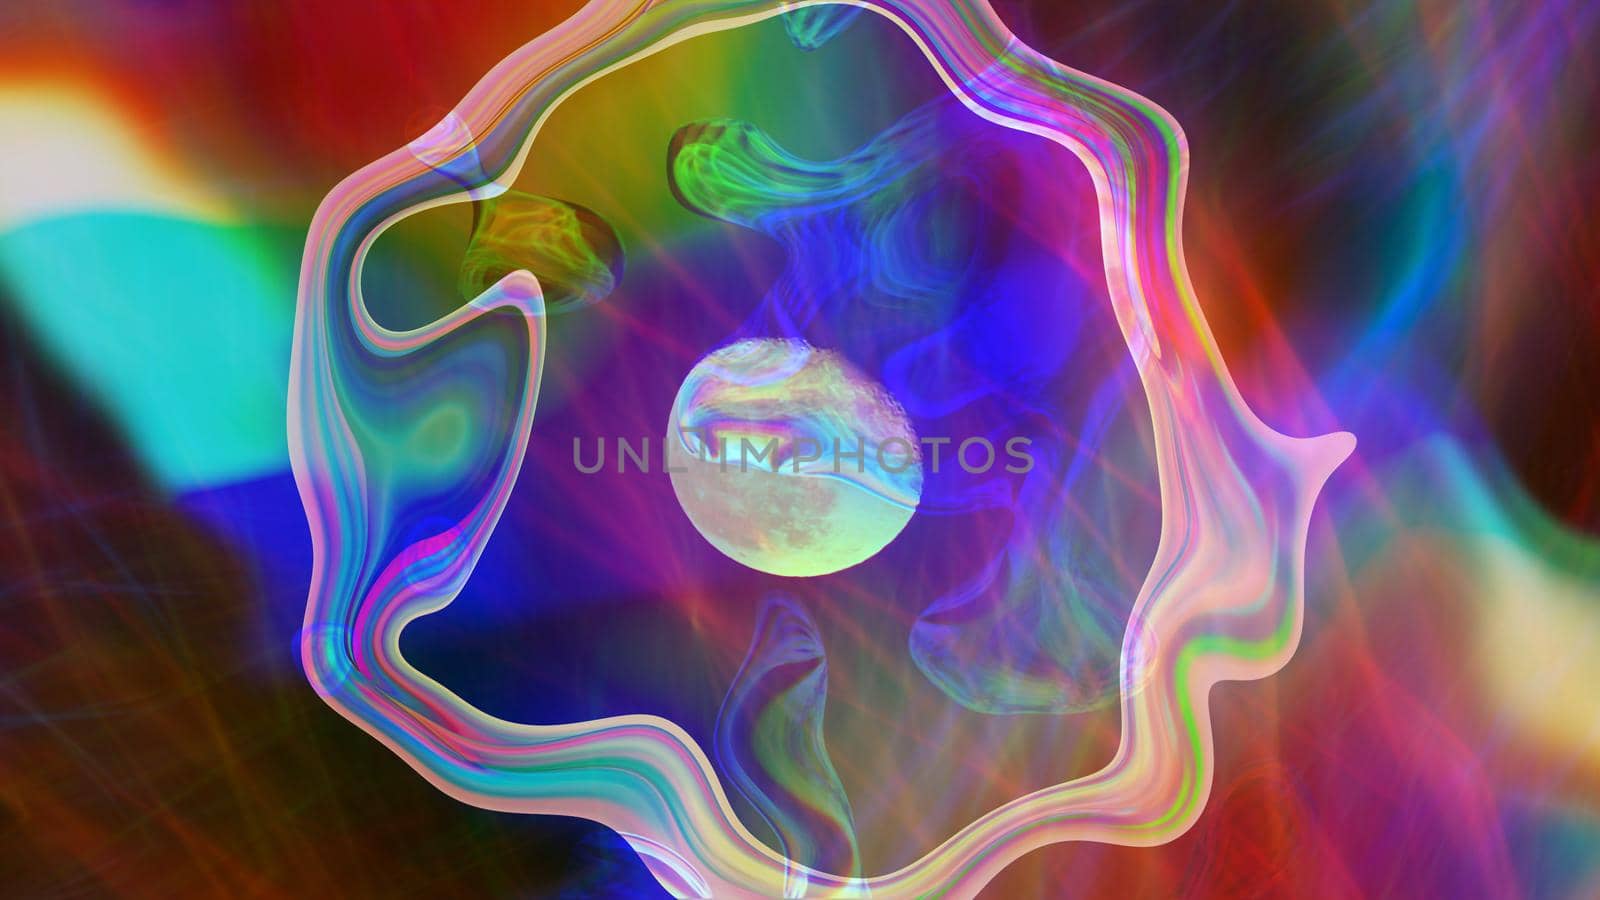 Abstract background with a fantasy decor of figures and rainbow highlights